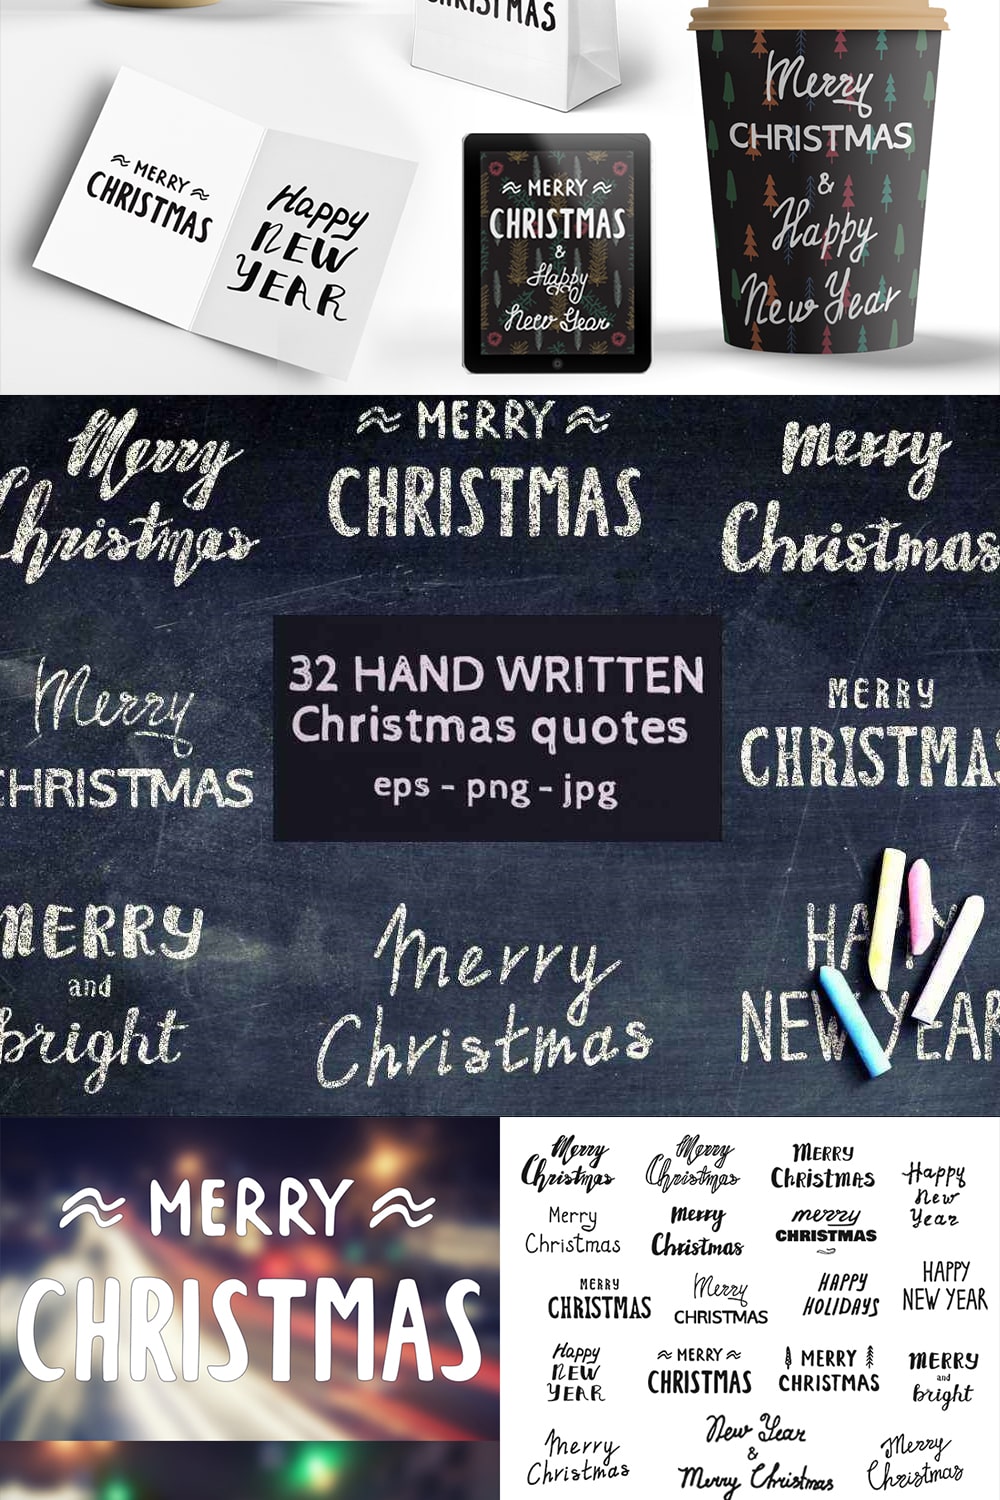 Christmas and New Year Quotes Handwritten Pinterest image.